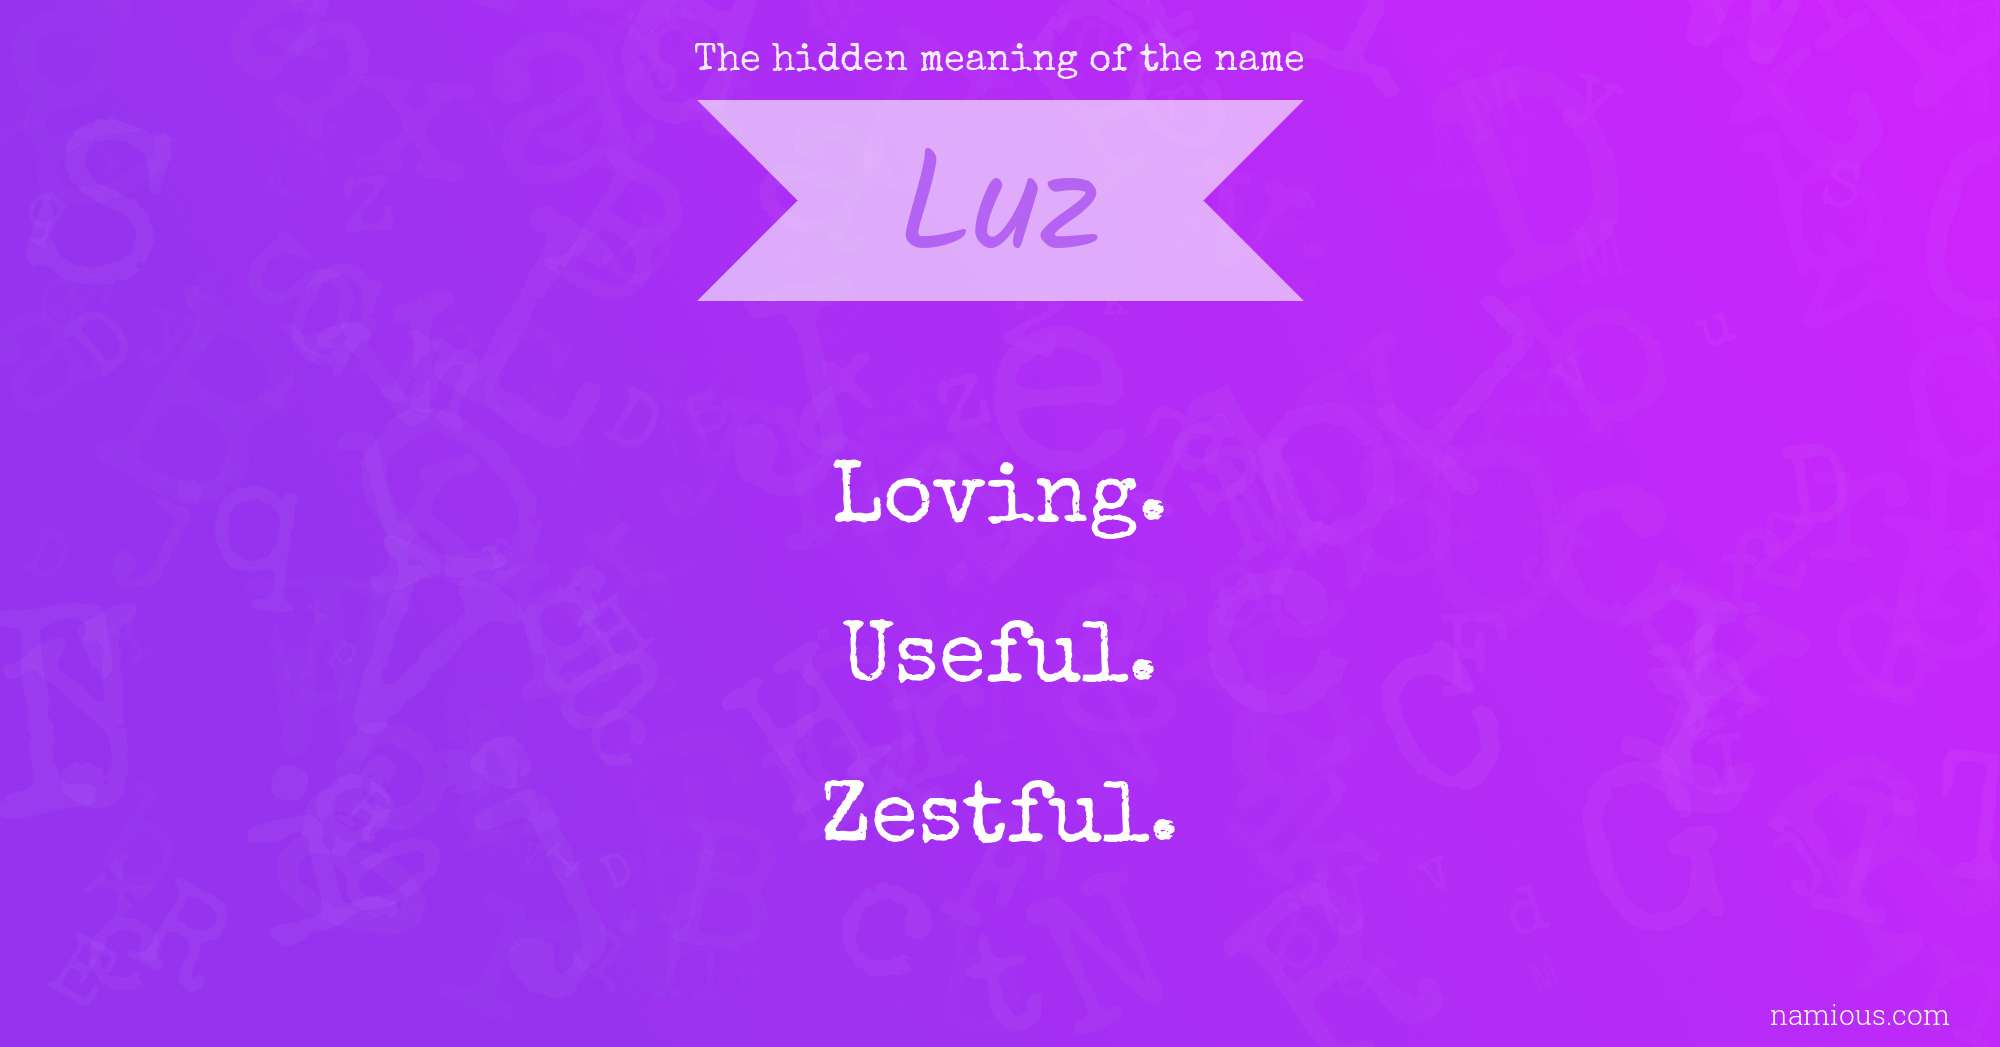 The hidden meaning of the name Luz